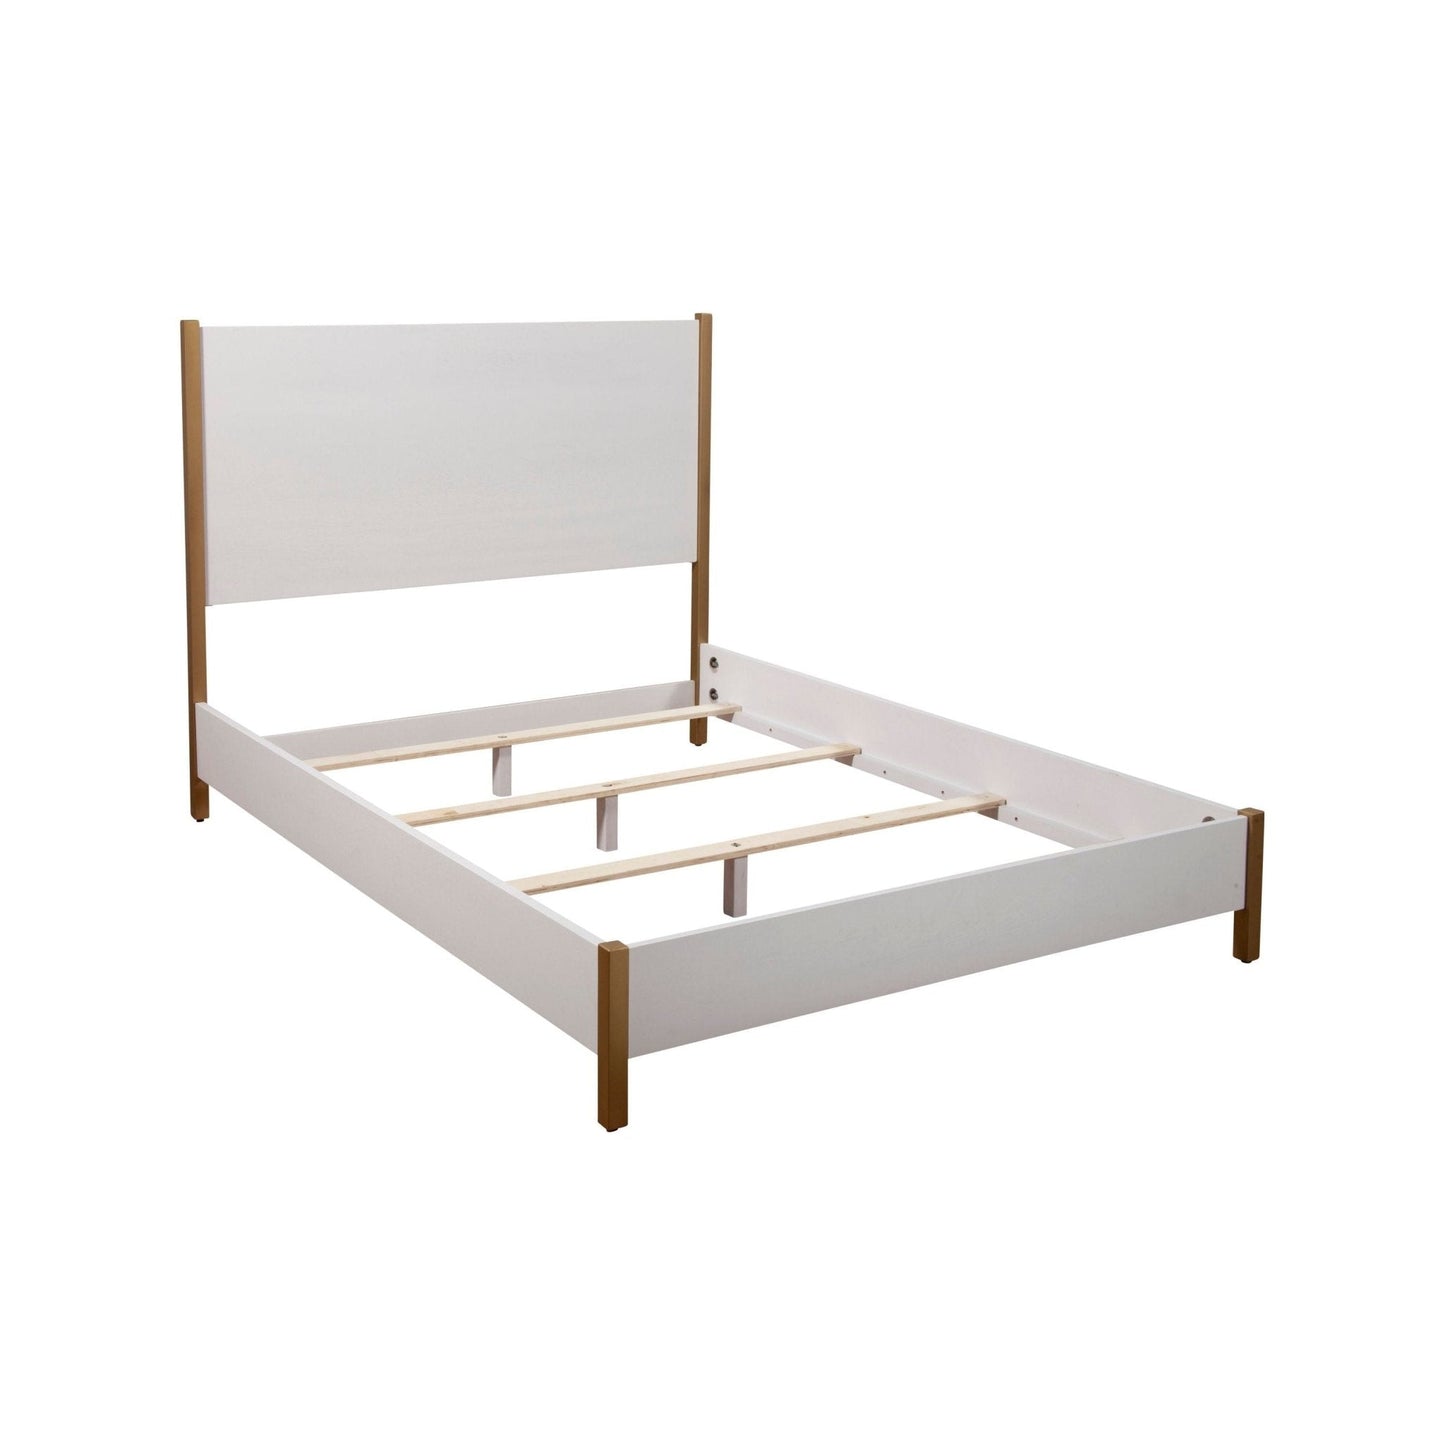 Madelyn Panel Bed